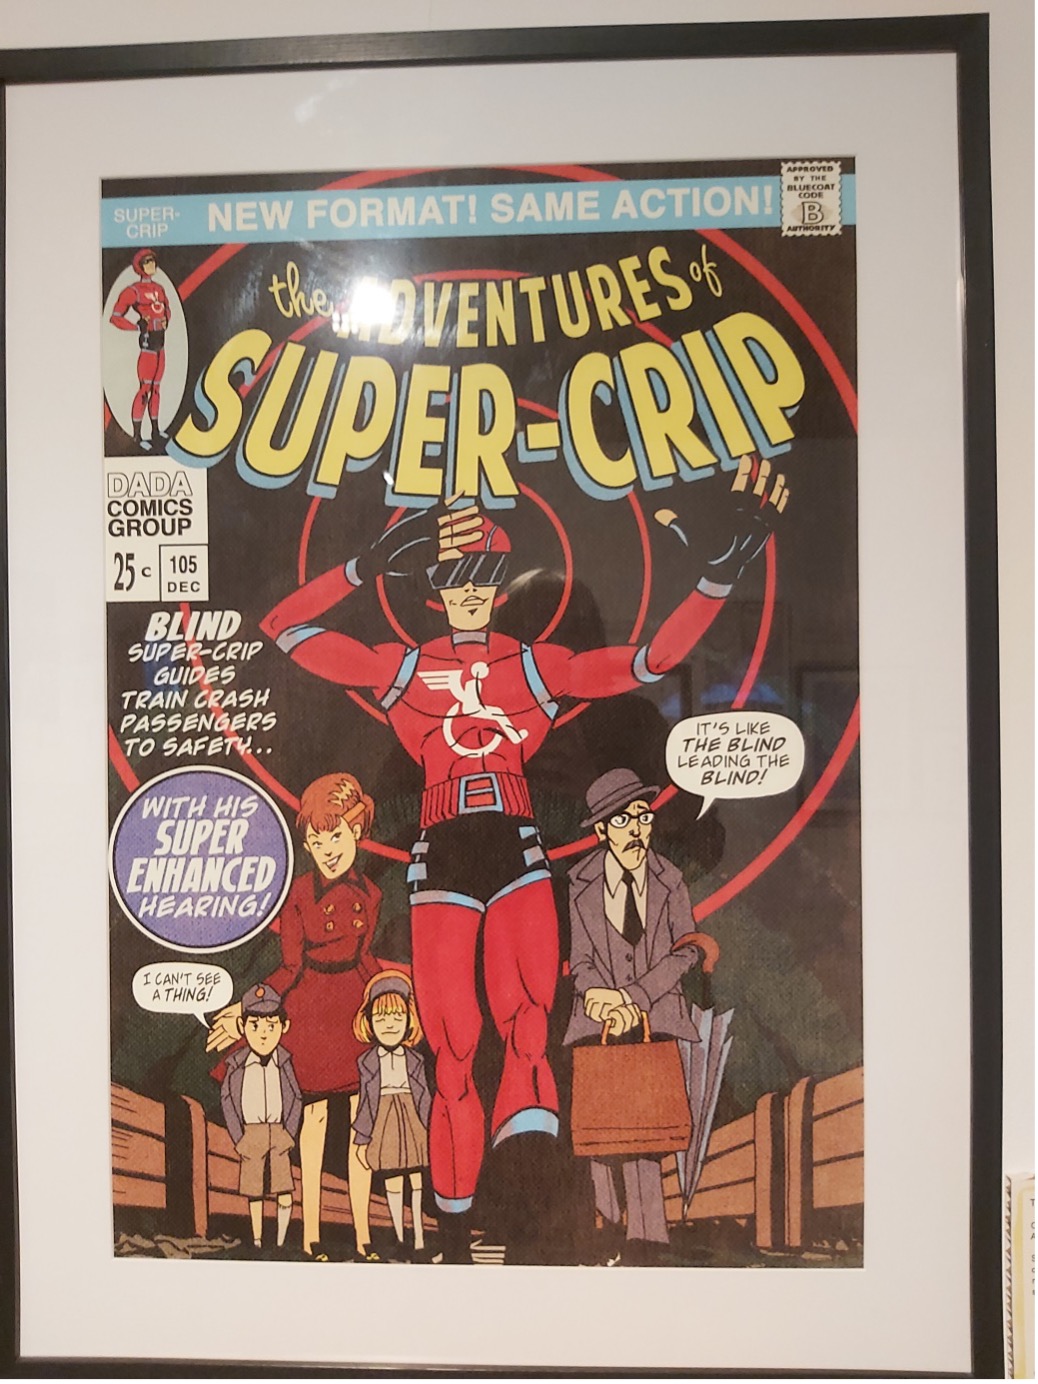 A framed comic picture or cover with the text 'The adventures of Super-Crip' and an illustration of a superhero with a woman and two children to their right and a man to the left